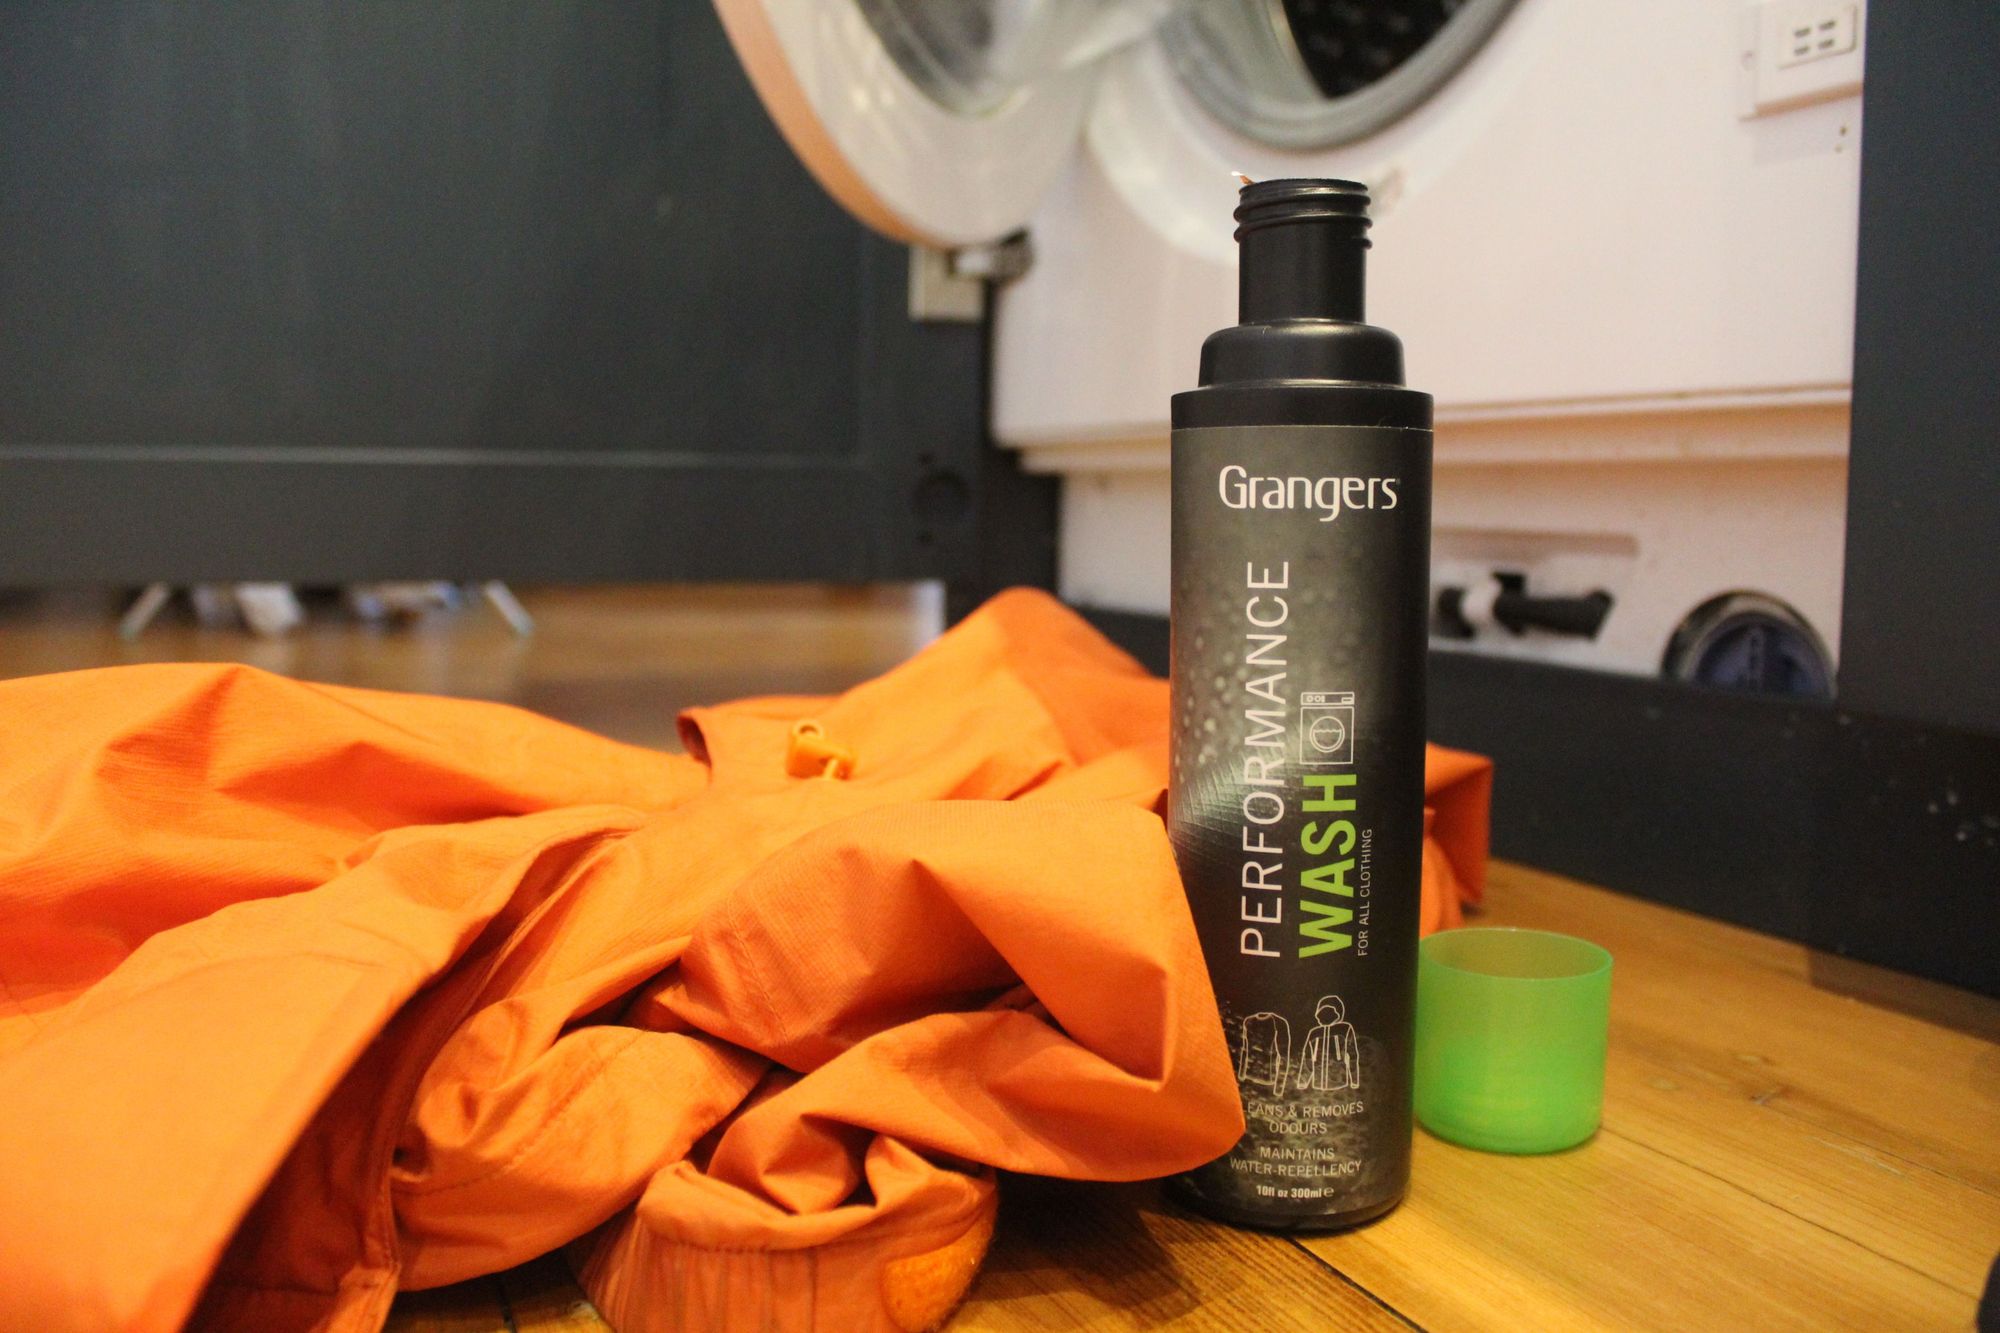 Reproofing a jacket using Granger's performance wash. Photo: Stuart Kenny